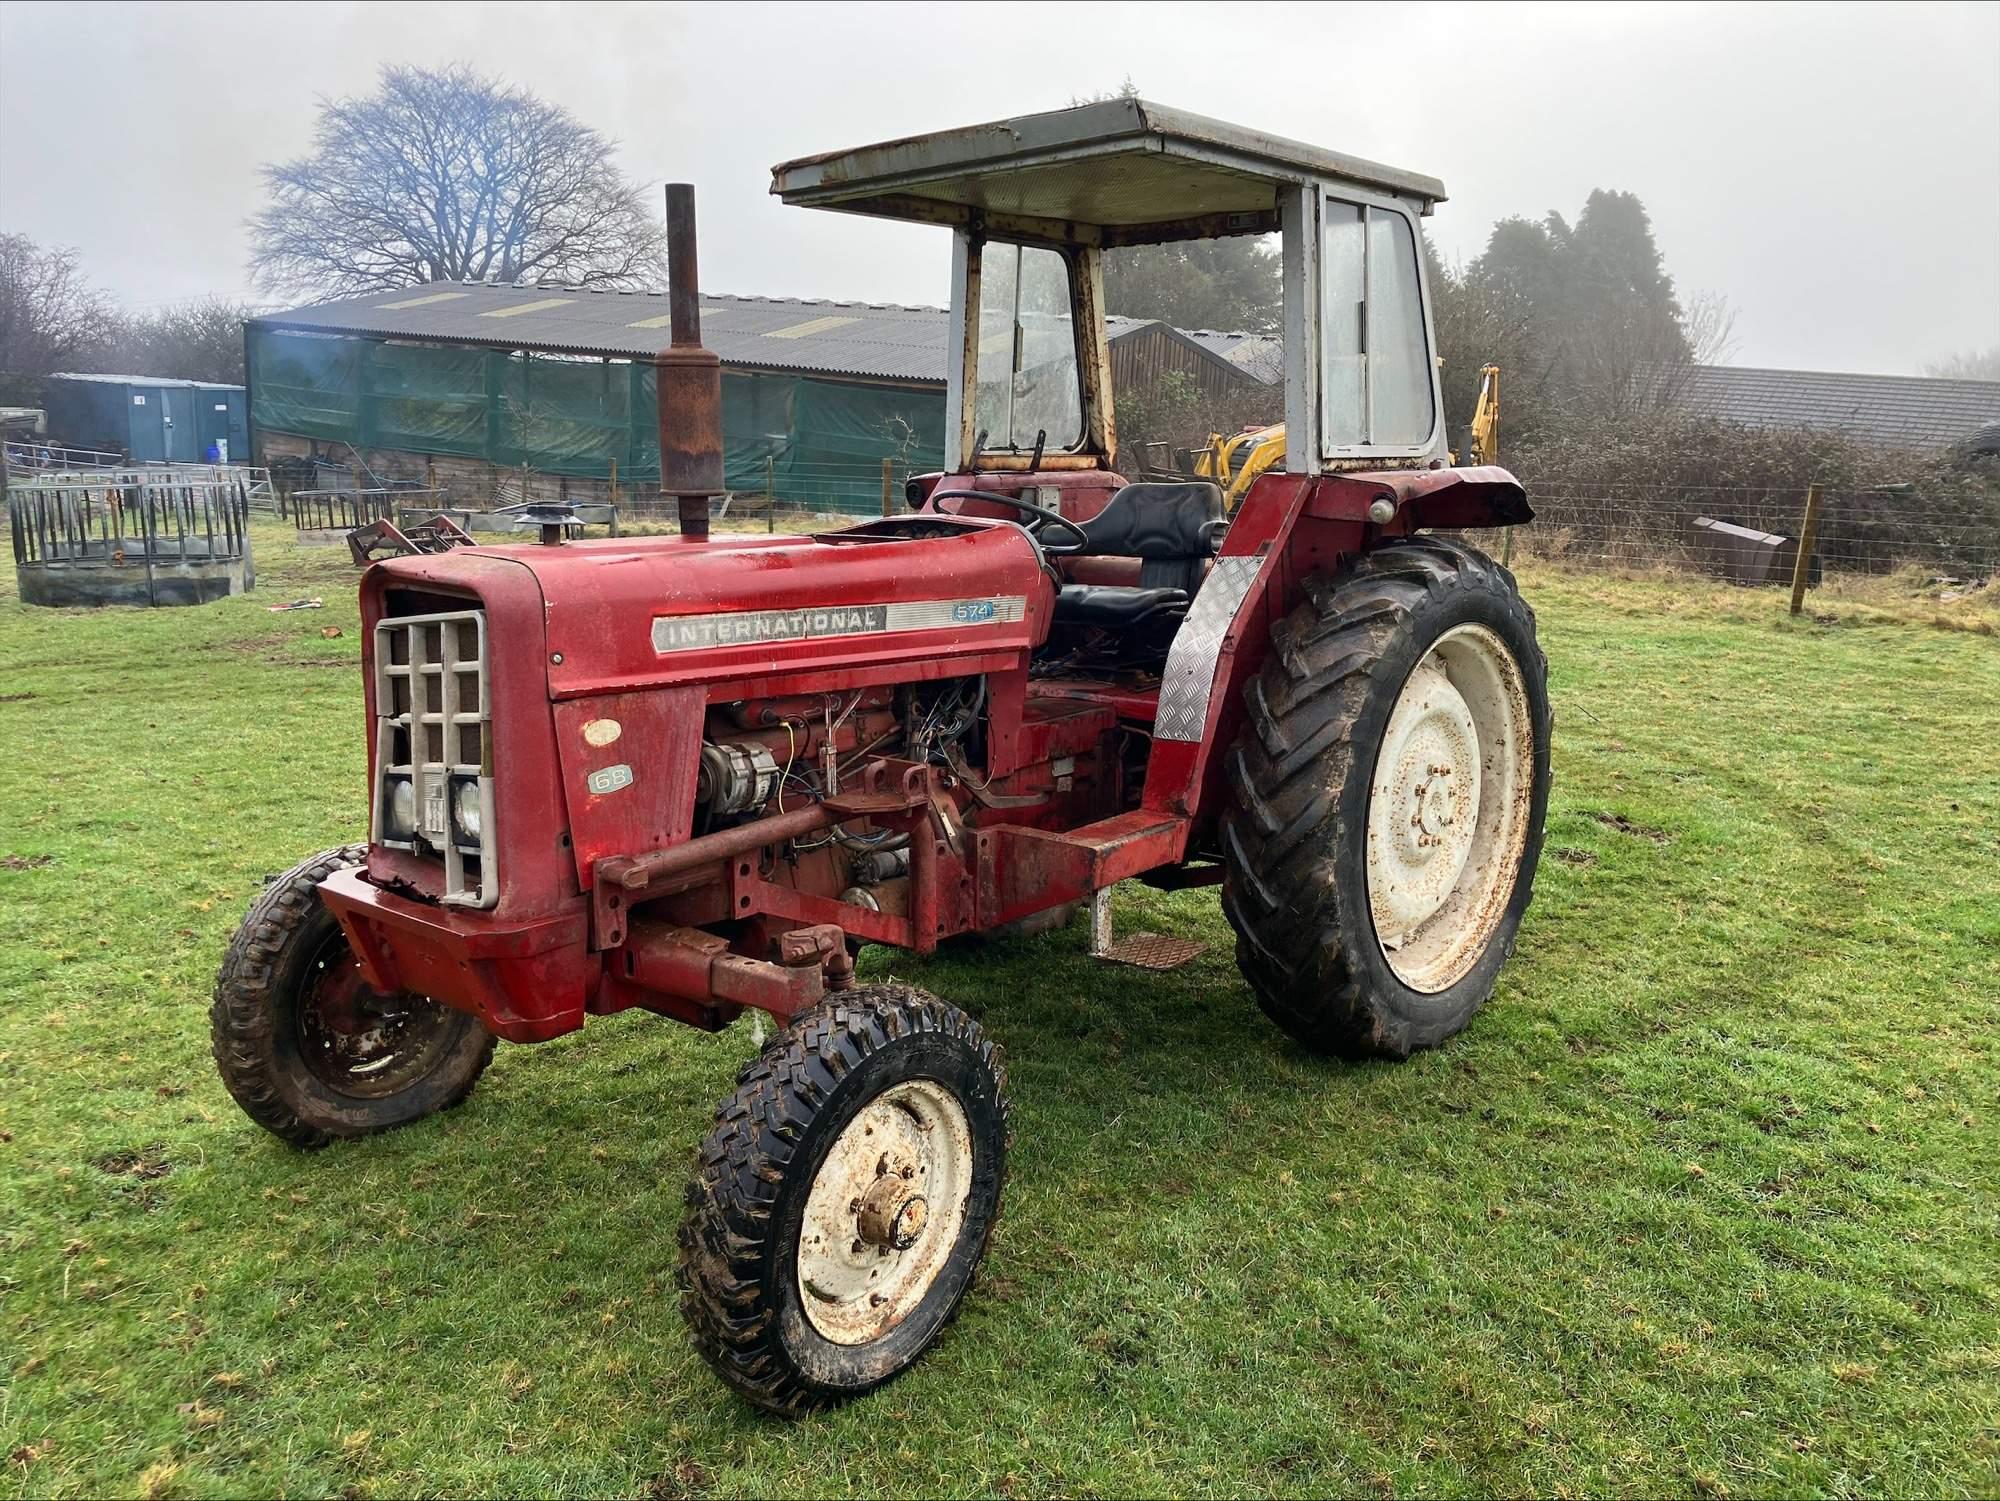 Used International Tractors for Sale | Auto Trader Farm